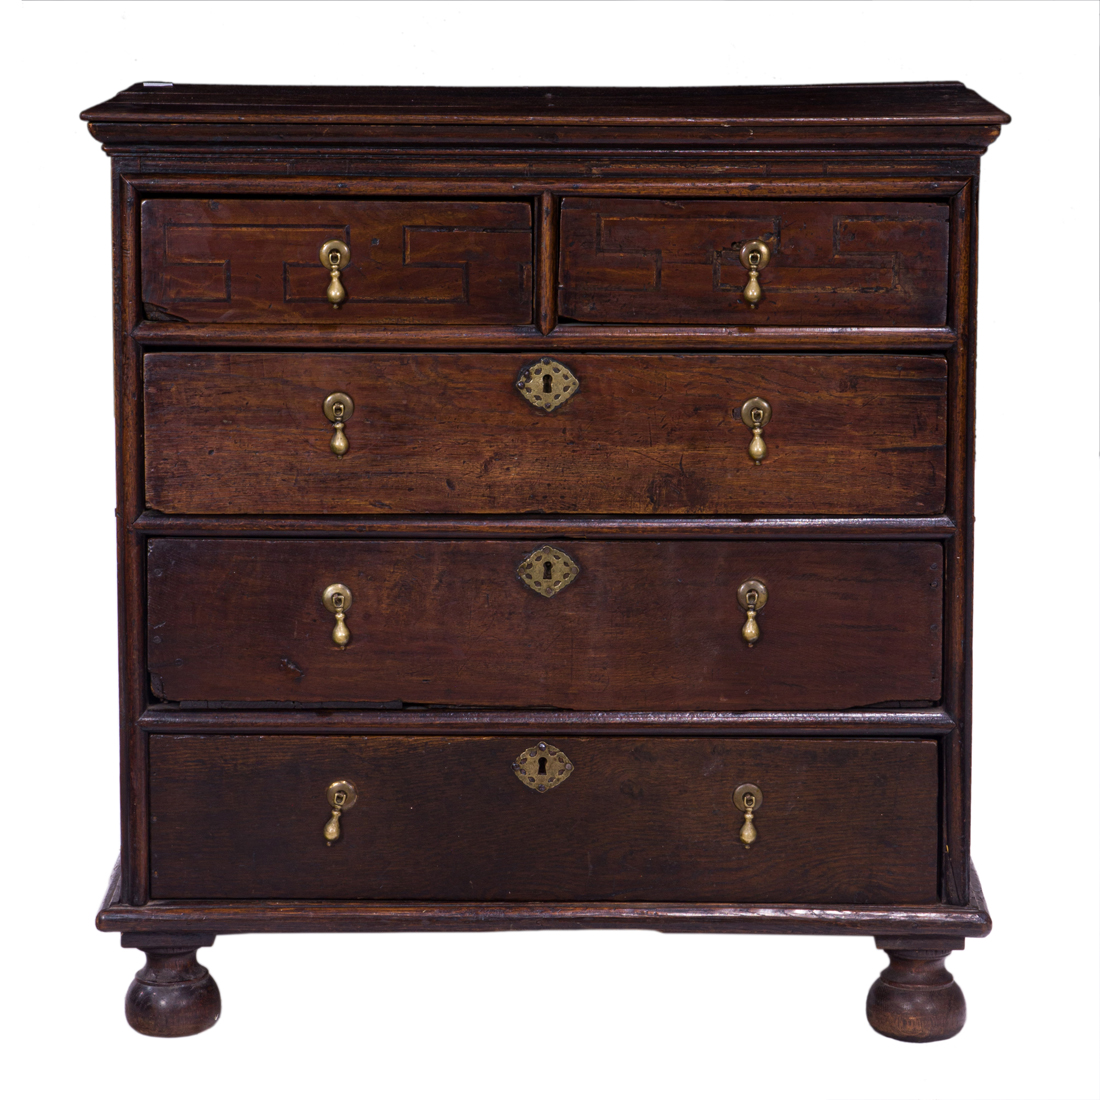 A PERIOD WILLIAM & MARY CHEST OF